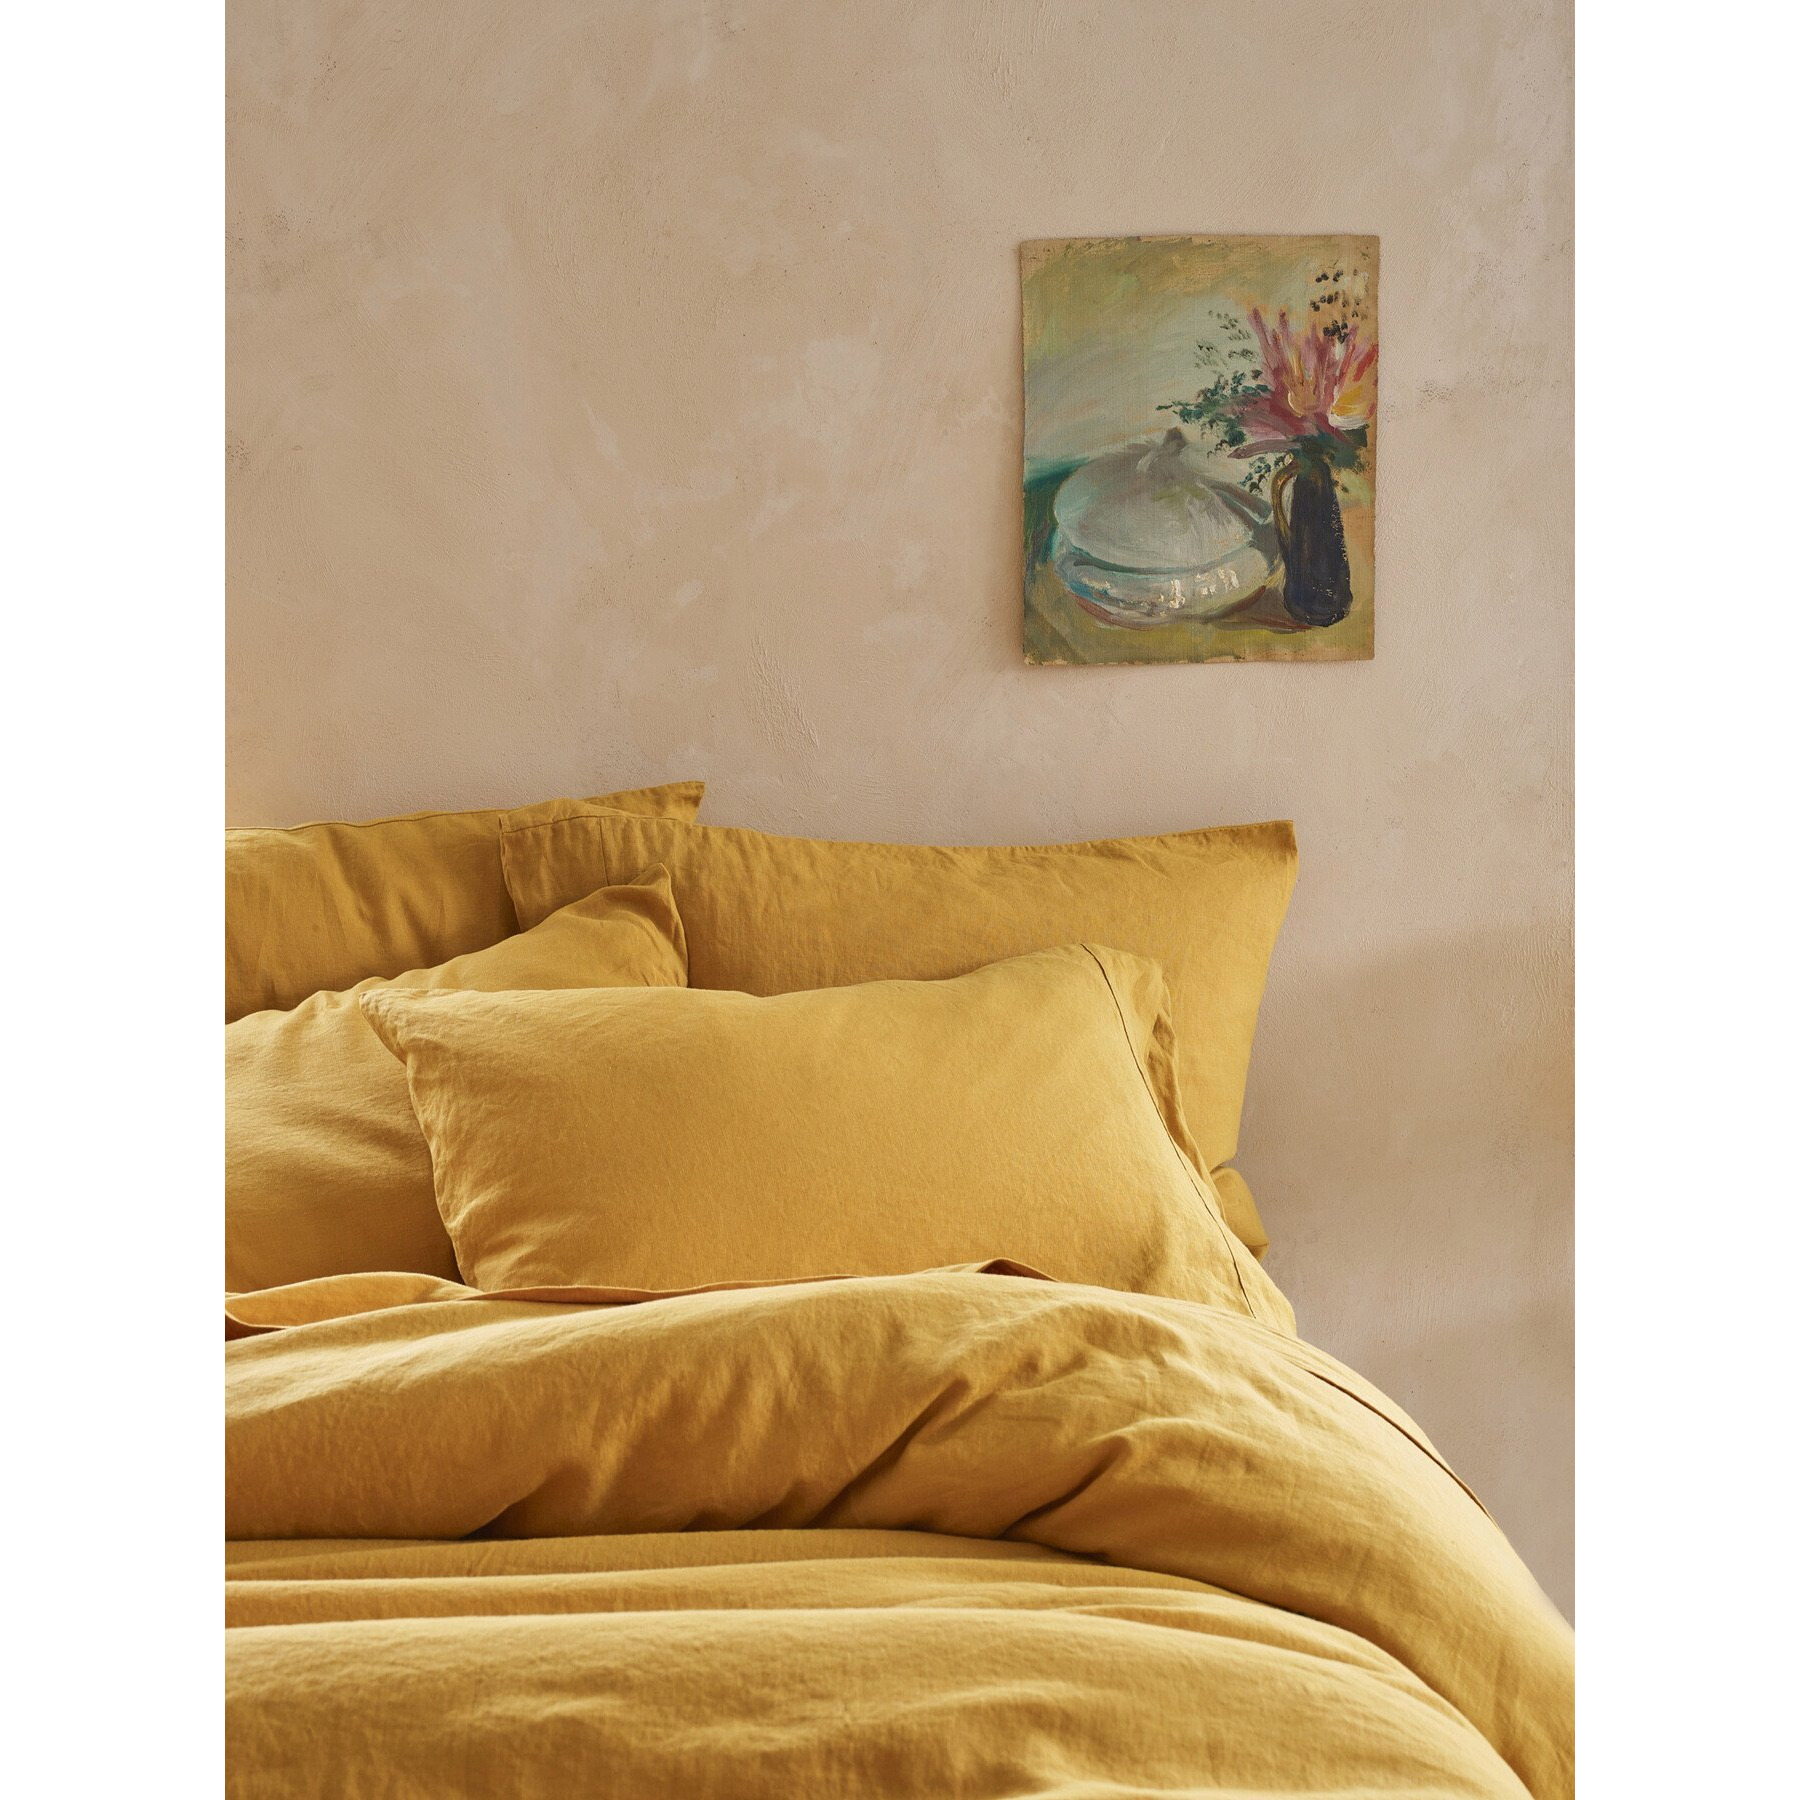 Piglet in Bed Linen Duvet Cover - Size Super King Yellow - image 1